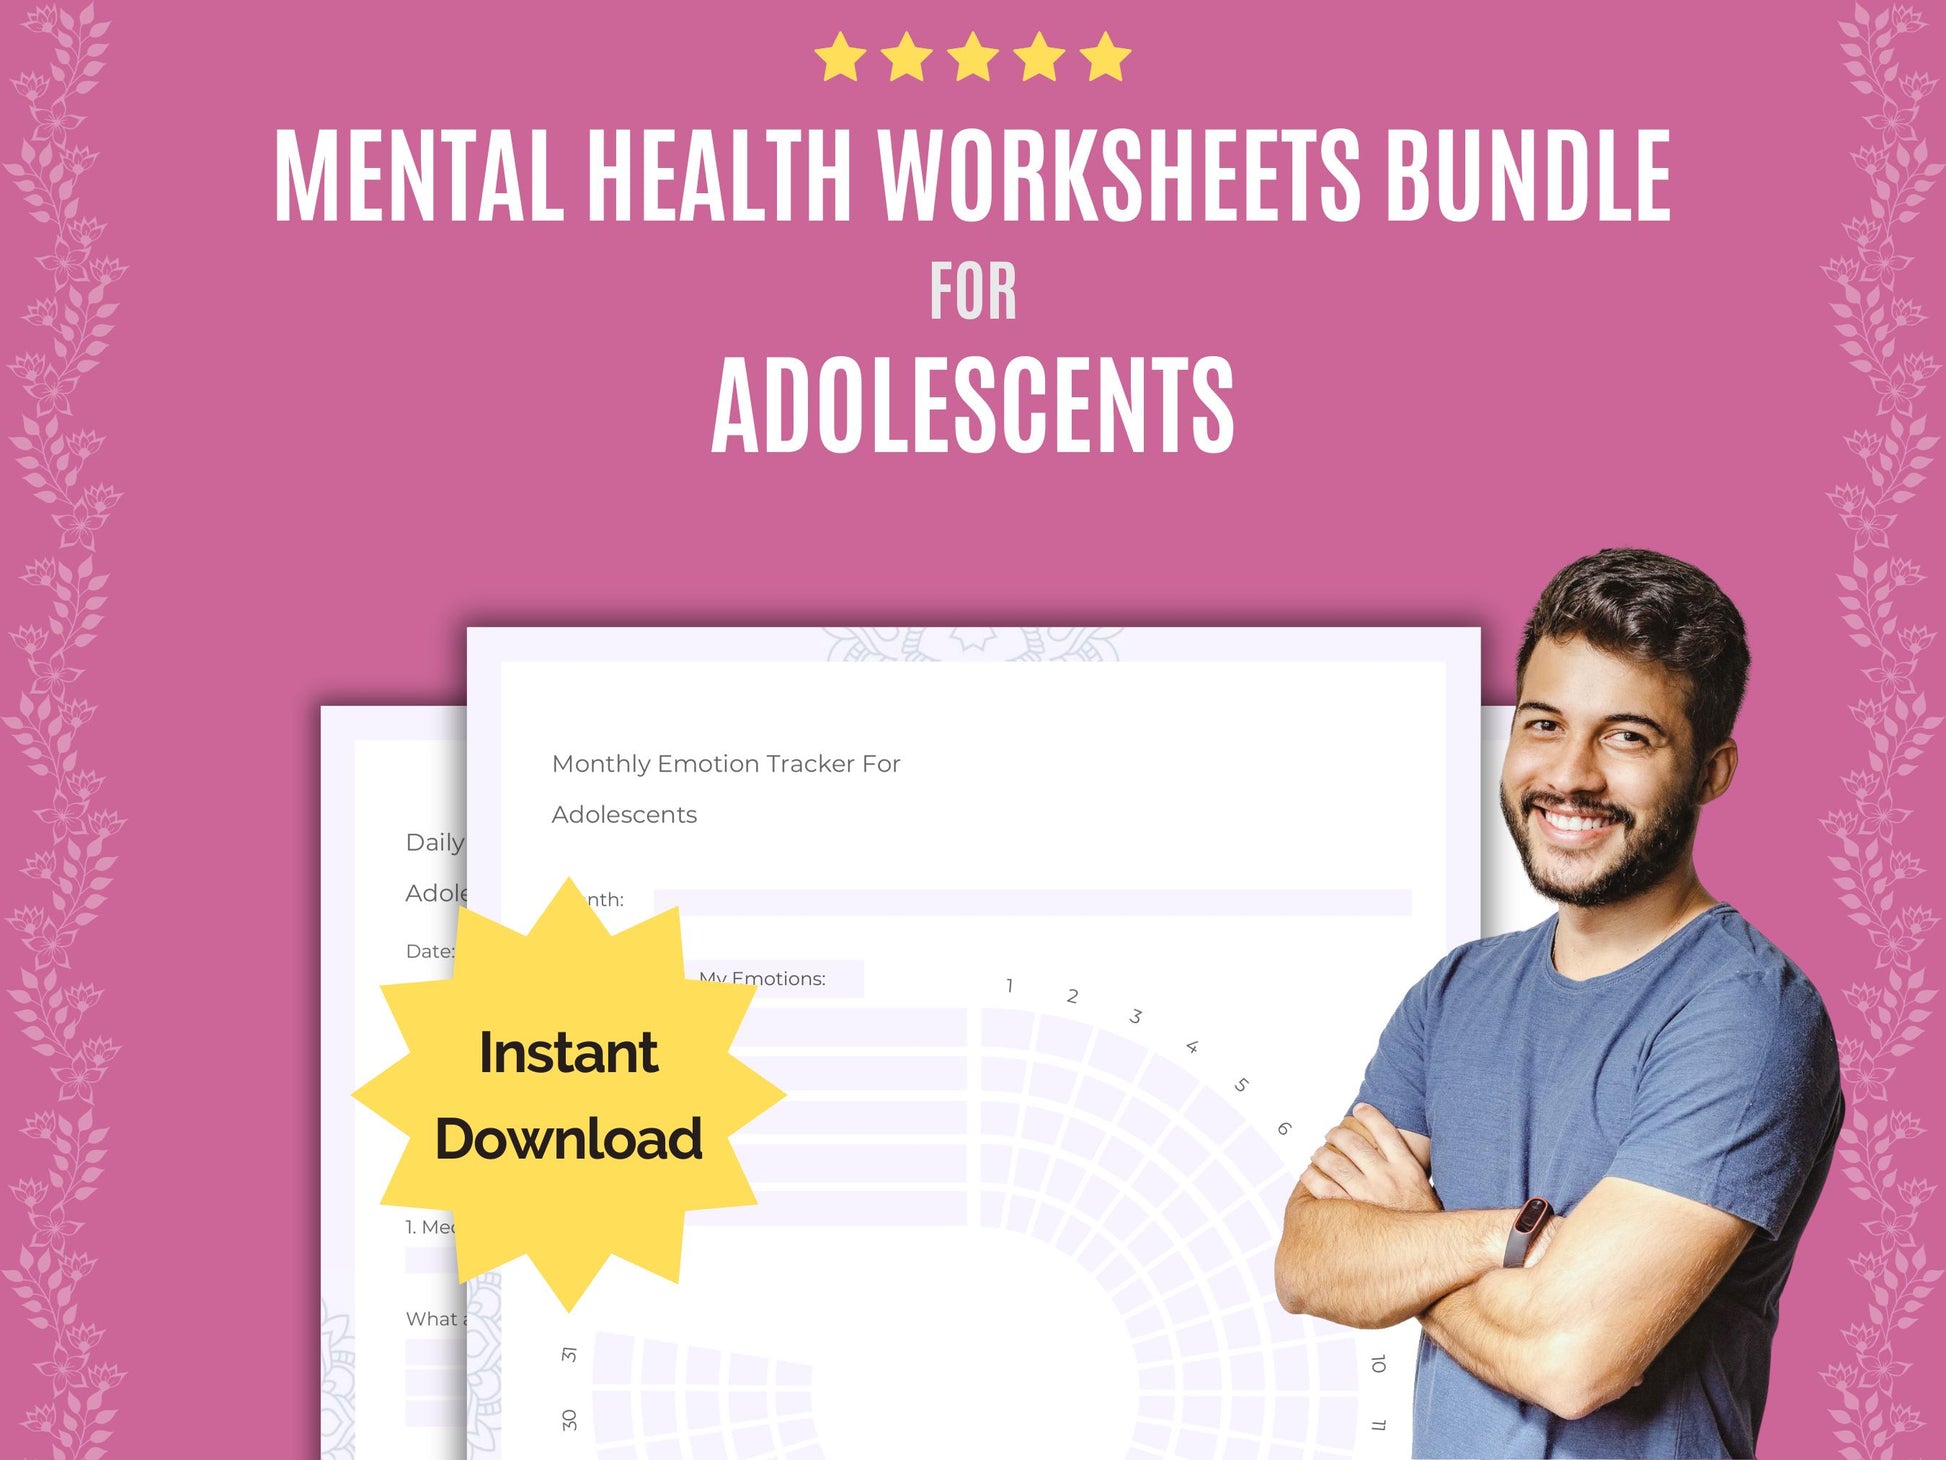 Resources, Adolescents Notes, Adolescents Therapy, Goal Setting, Templates, Adolescents Mental Health, Adolescents Journals, Cheat Sheet, Counseling, Adolescents Planners, Journaling, Adolescents Tools, Workbooks